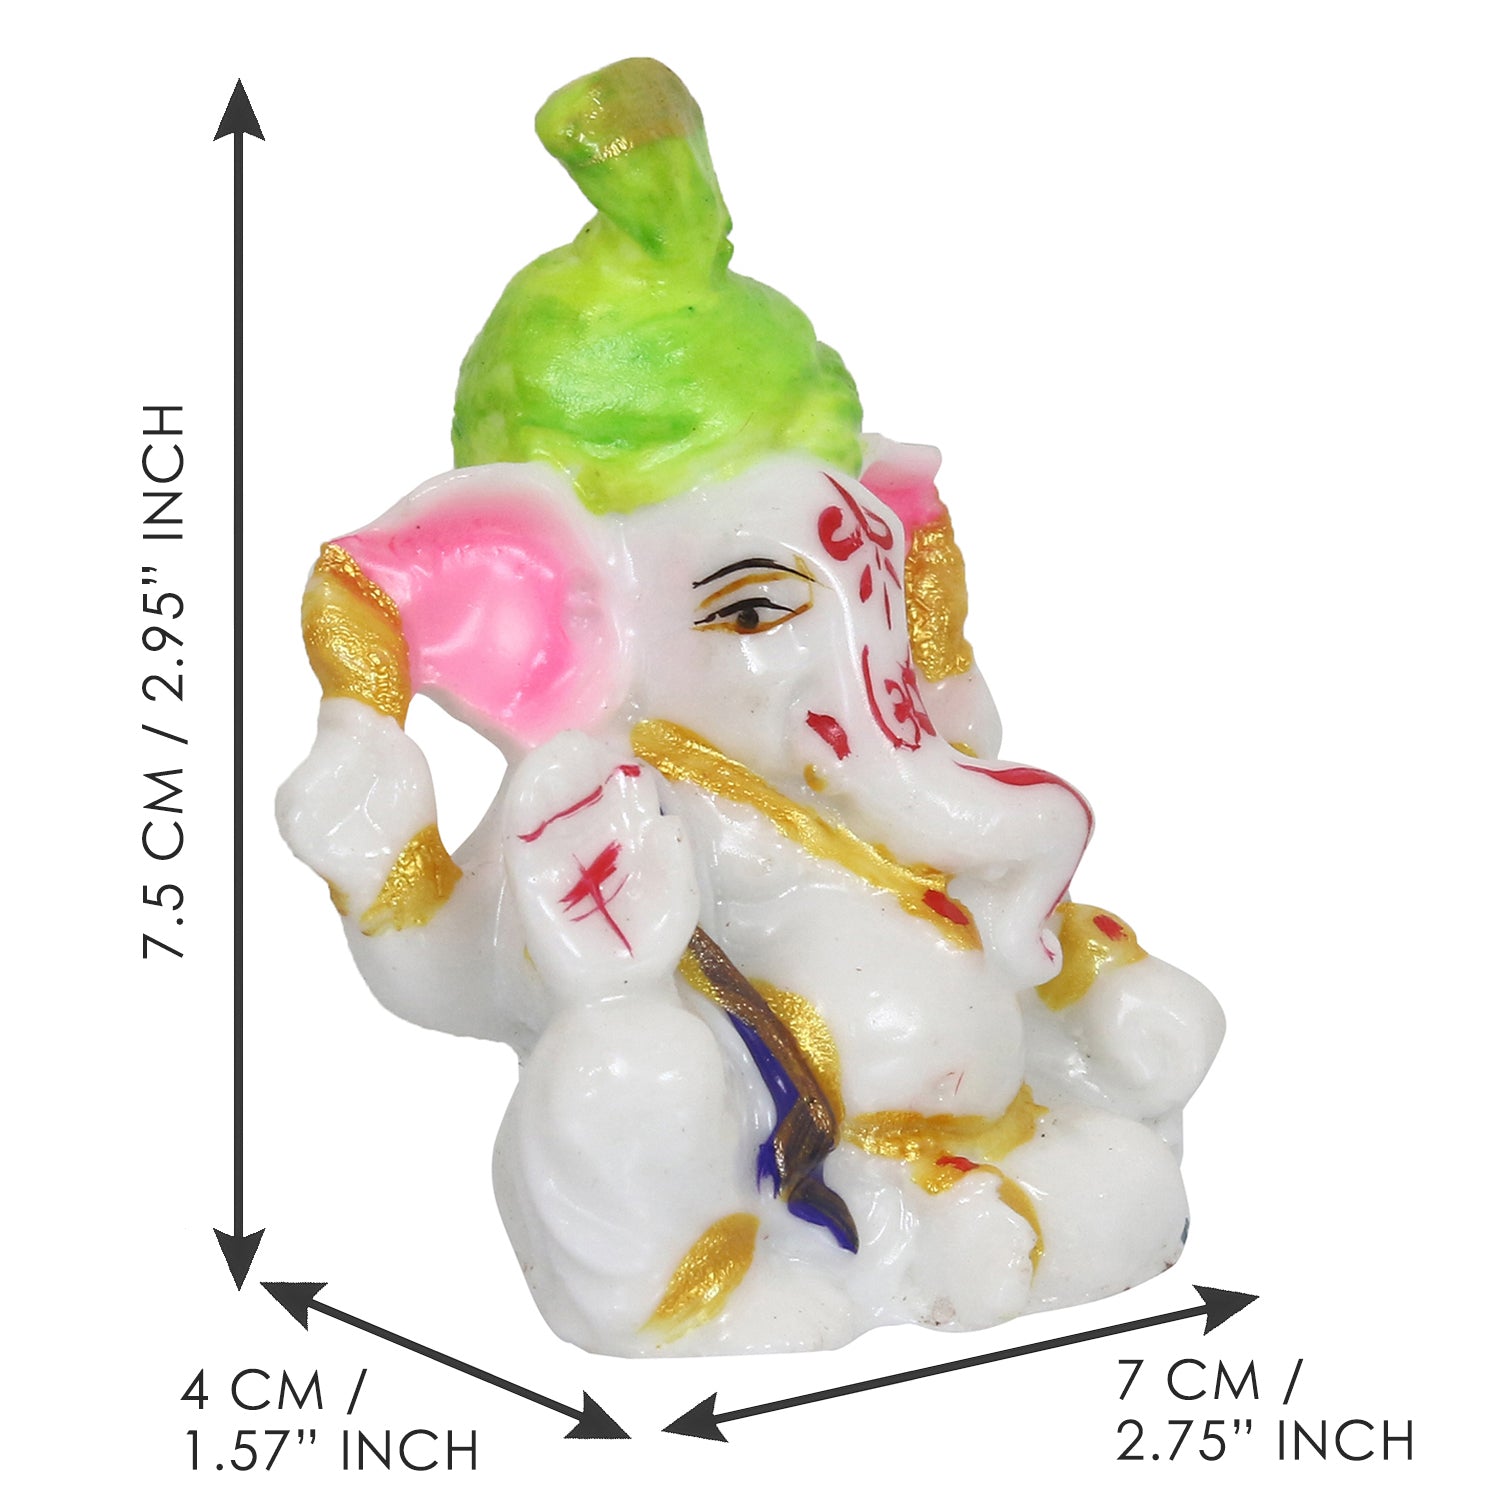 Decorative Lord Ganesha Idol For Car Dashboard, Home Temple, And Office Desks 3